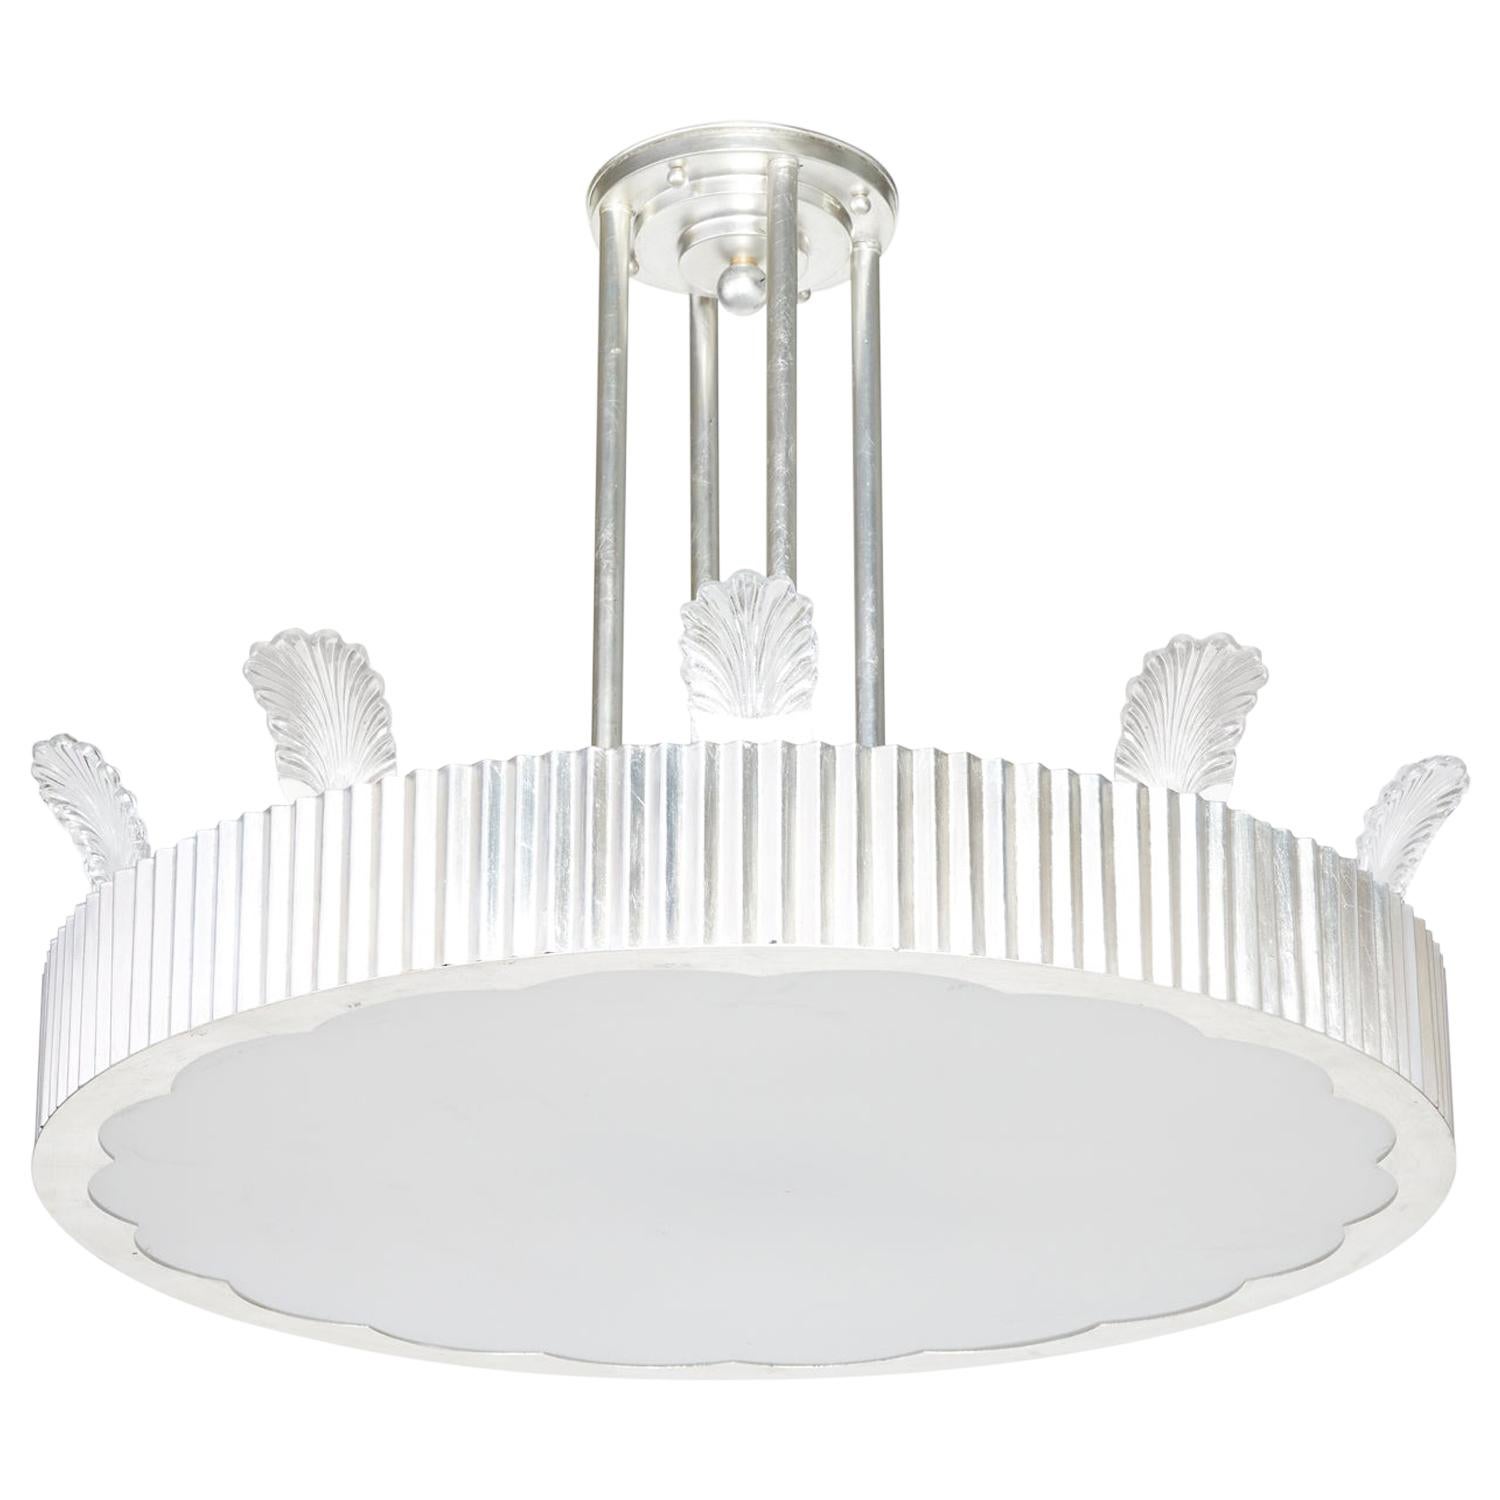 Single Tier Eltham Pendant Light, by David Duncan, with Czech Crystal Feathers 